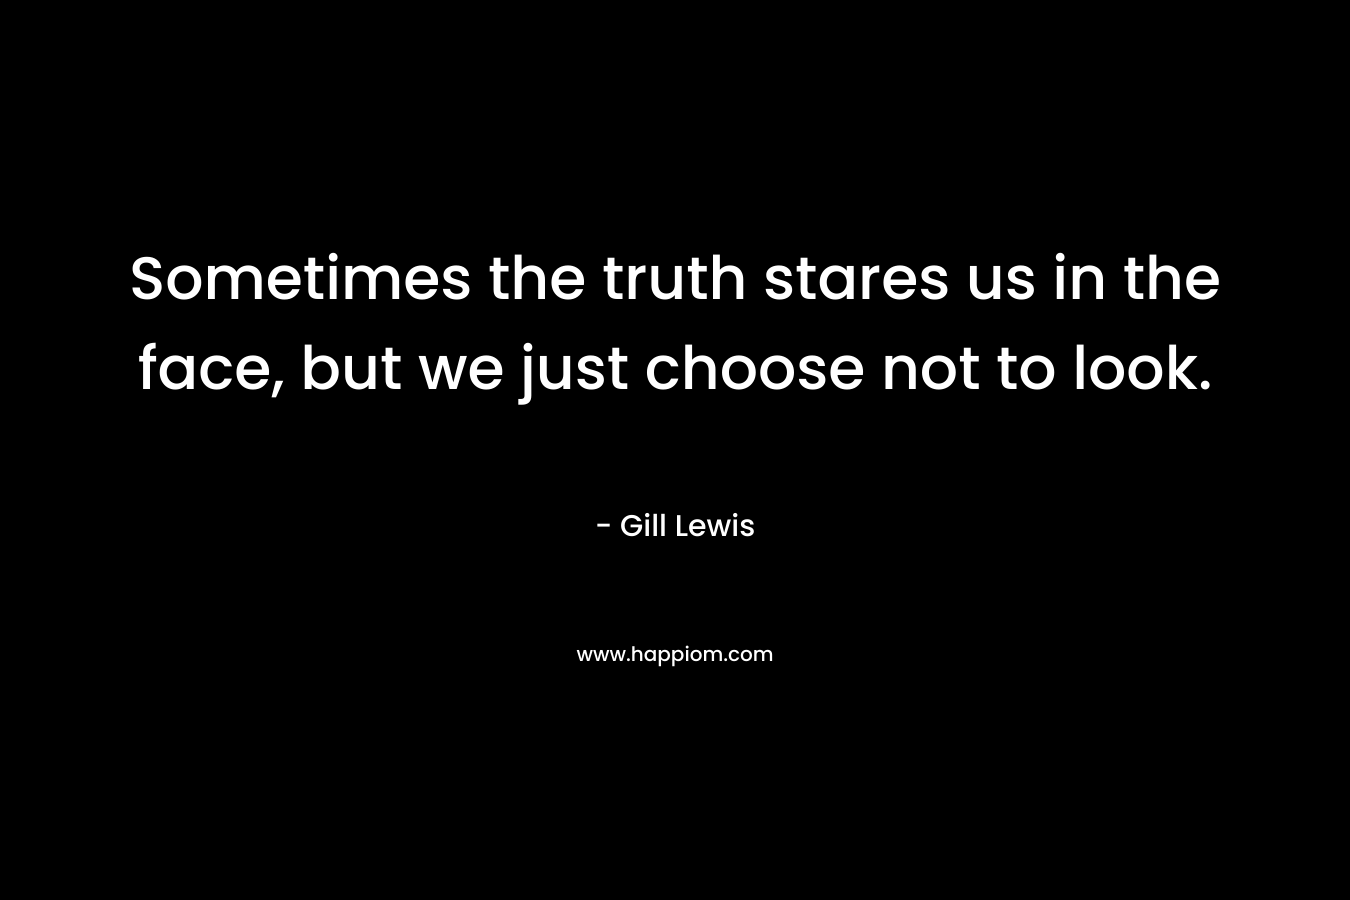 Sometimes the truth stares us in the face, but we just choose not to look. – Gill Lewis